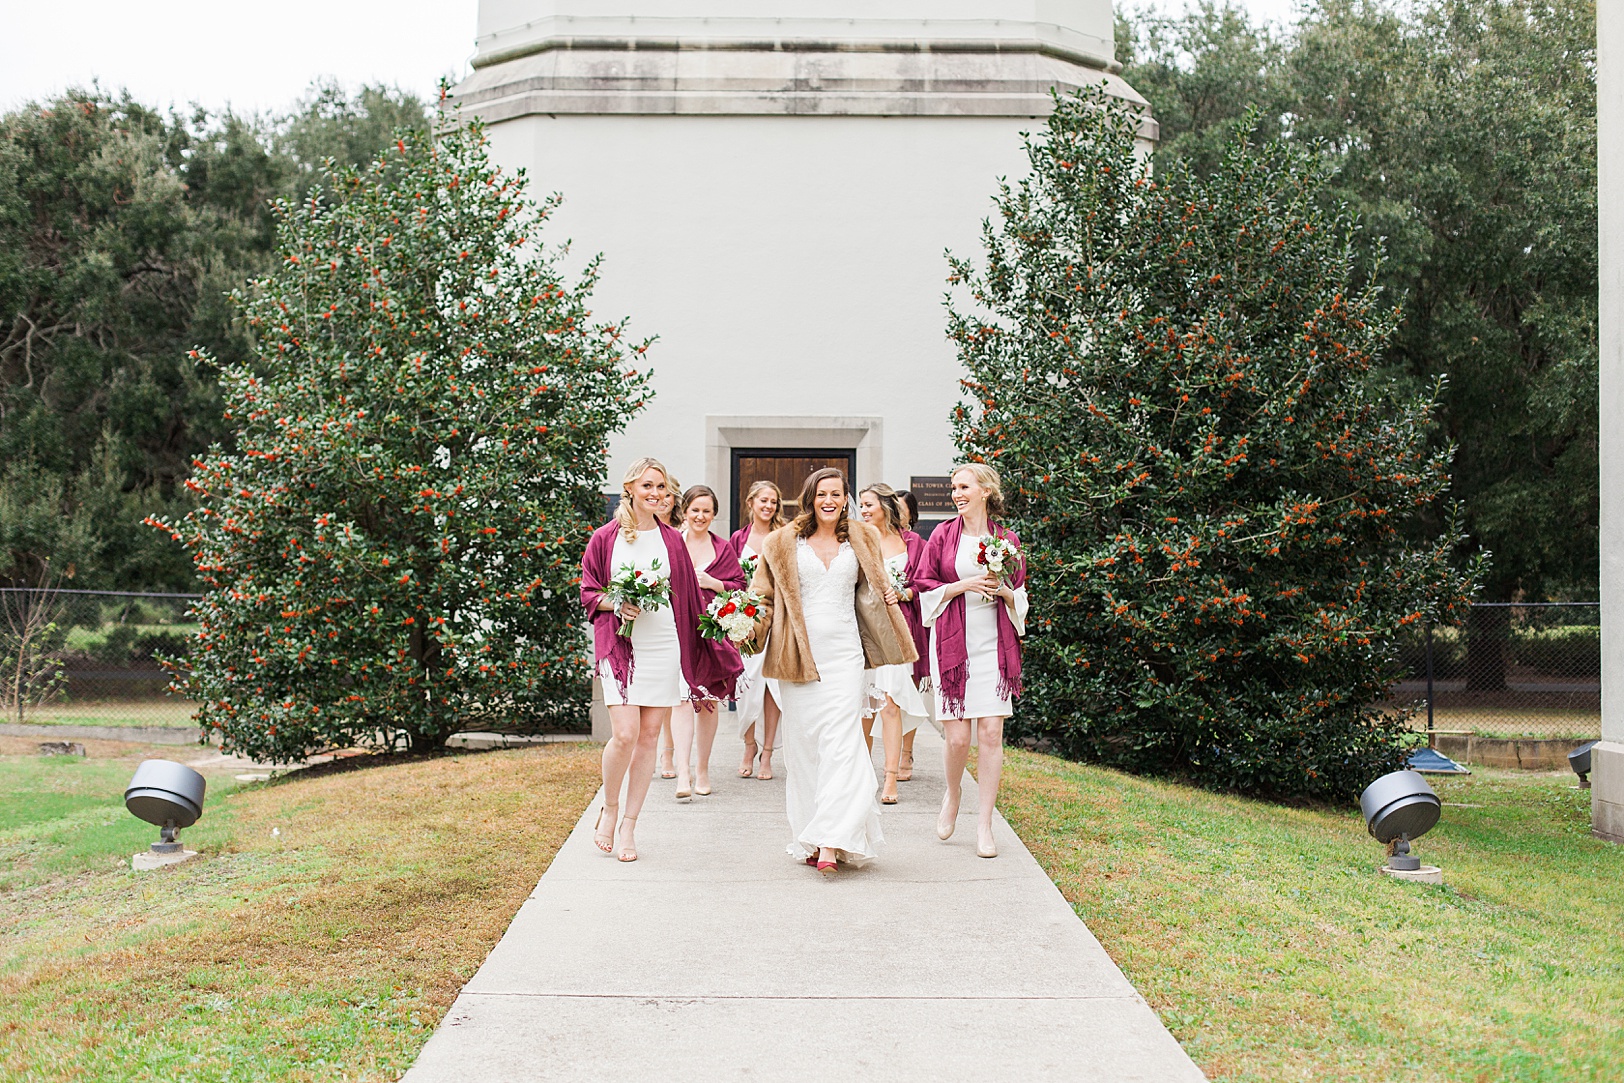 Bride and Bridesmaids at Summerall Chapel in December | Kaitlin Scott Photography